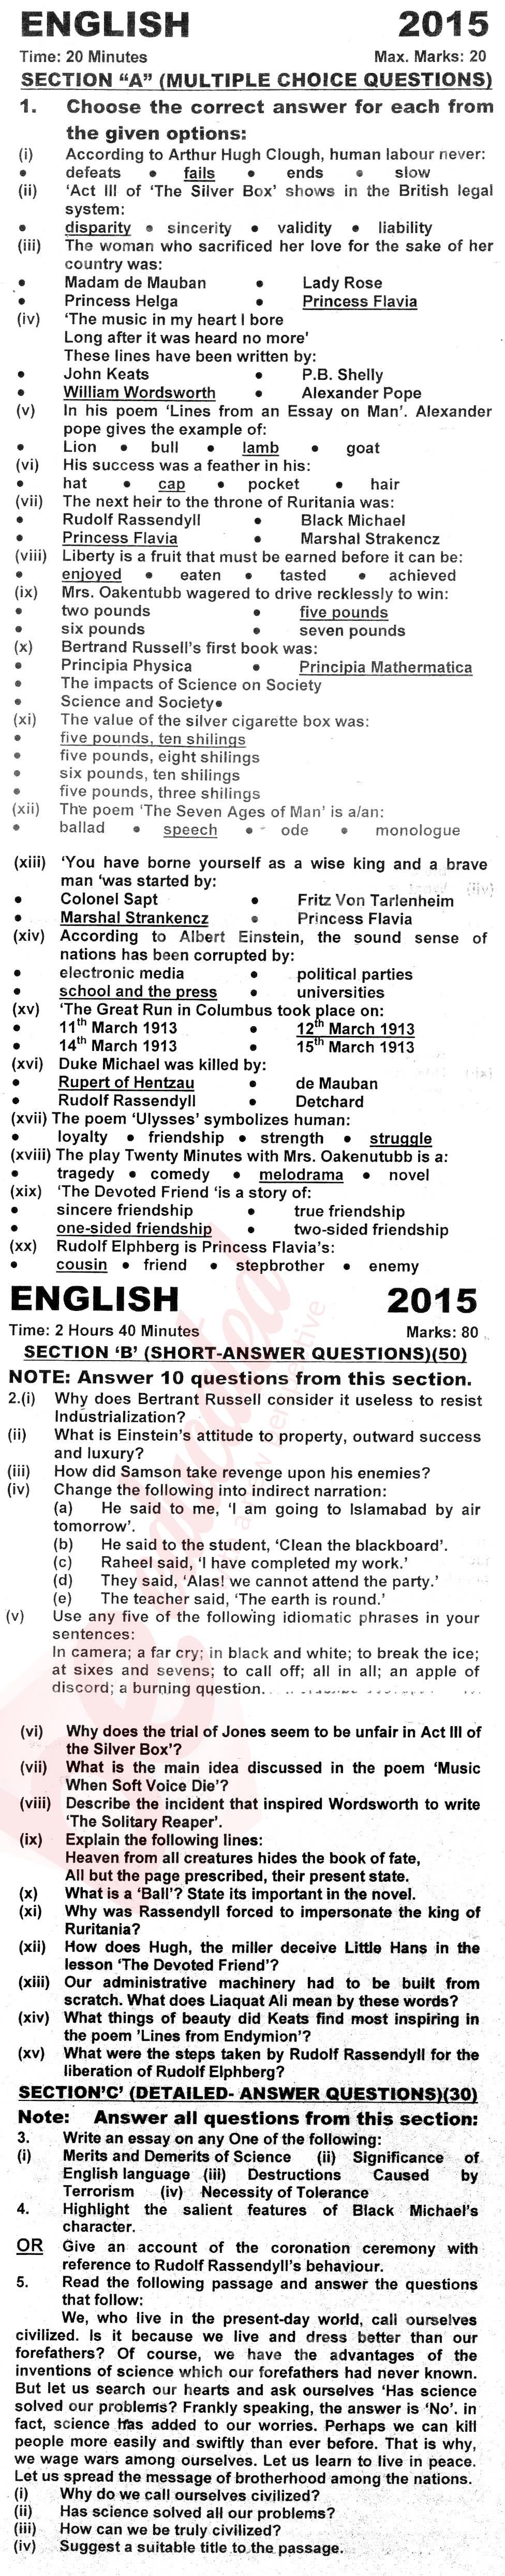 English 12th class Past Paper Group 1 KPBTE 2015